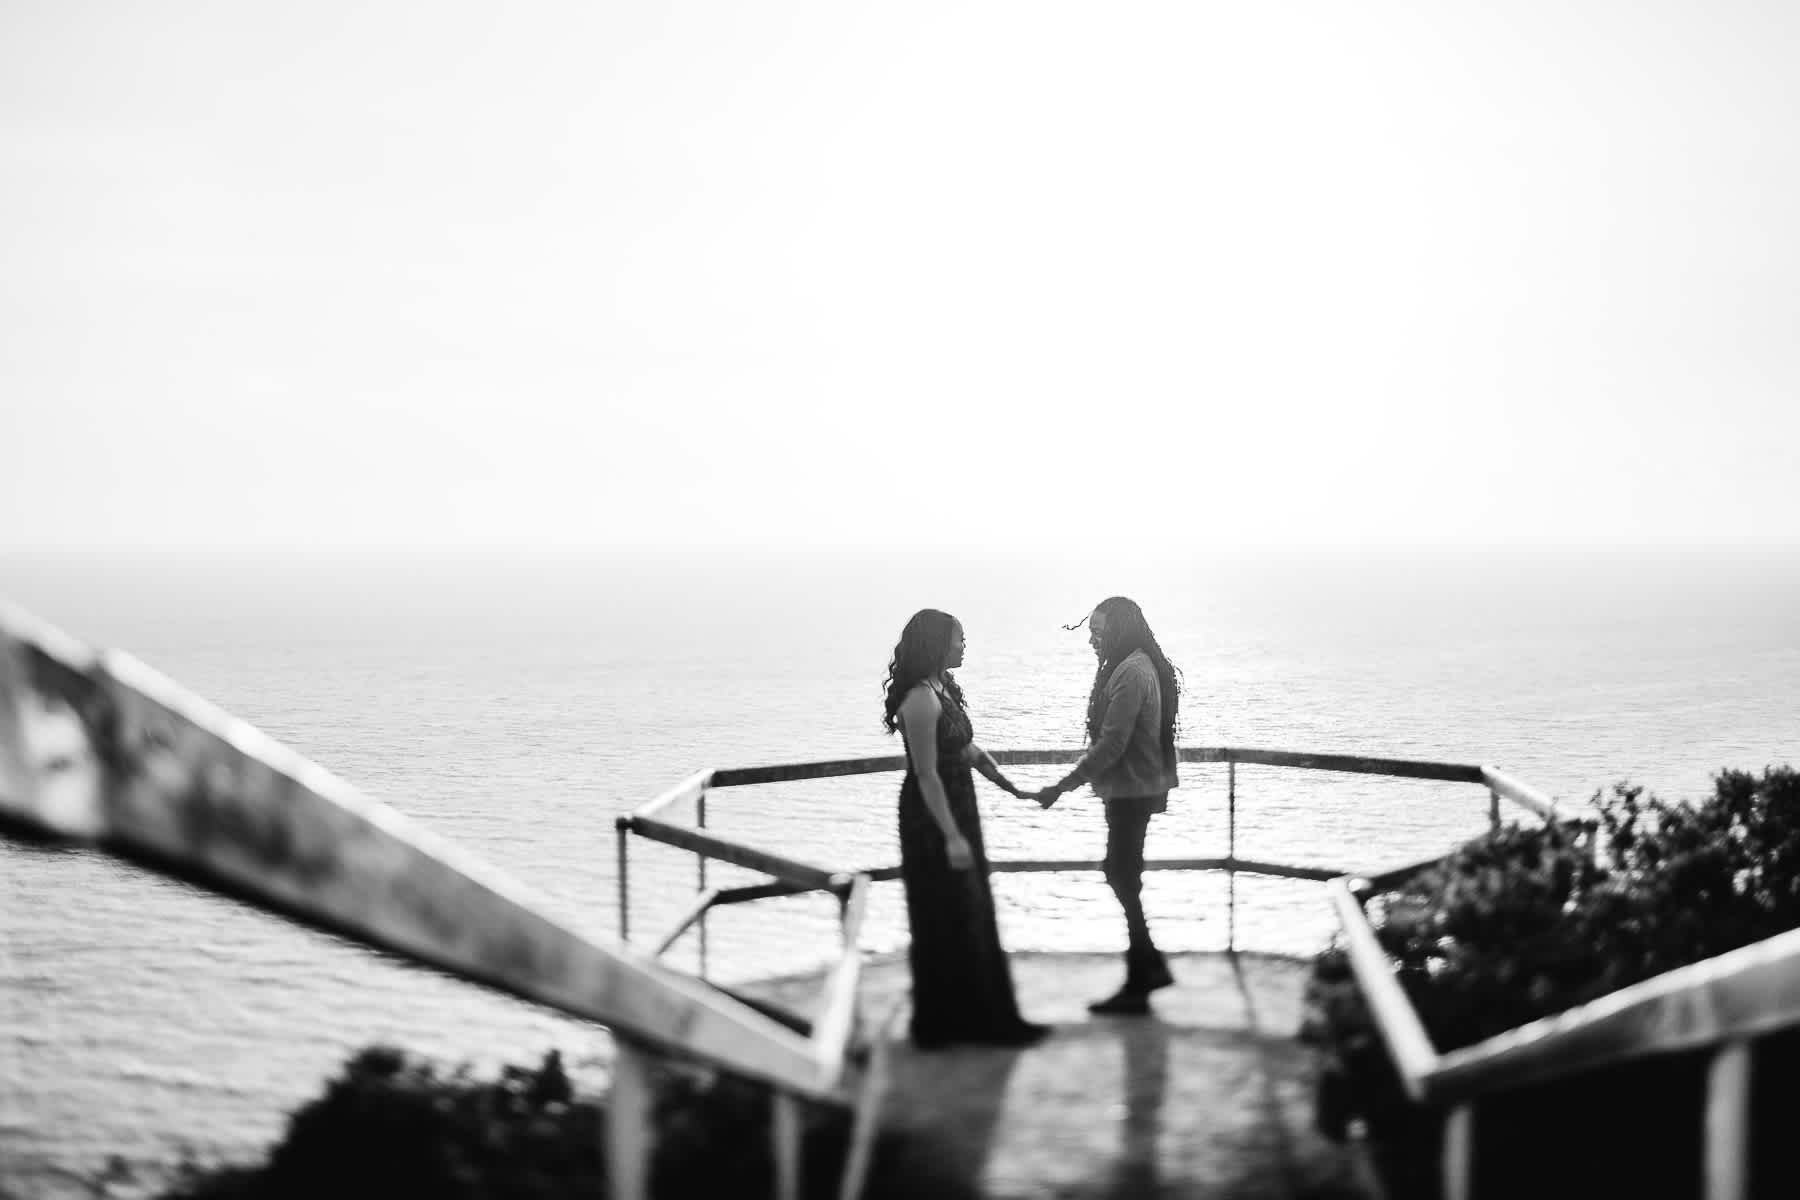 muir-beach-ca-spring-lifestyle-engagement-session-15